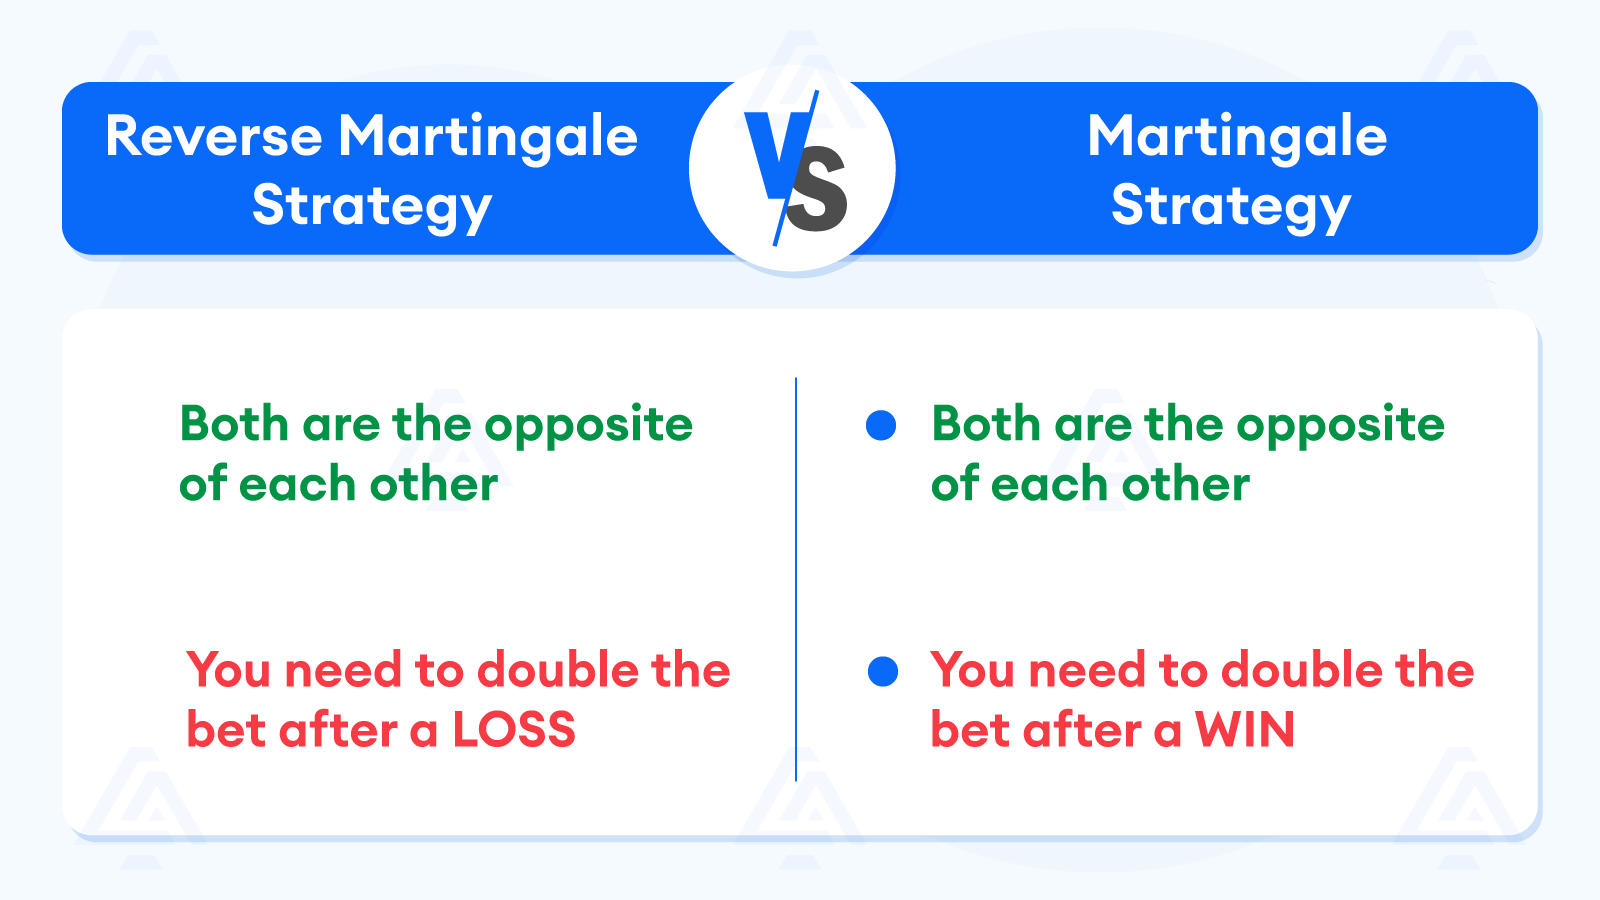 Is Reverse Martingale Better Than Martingale